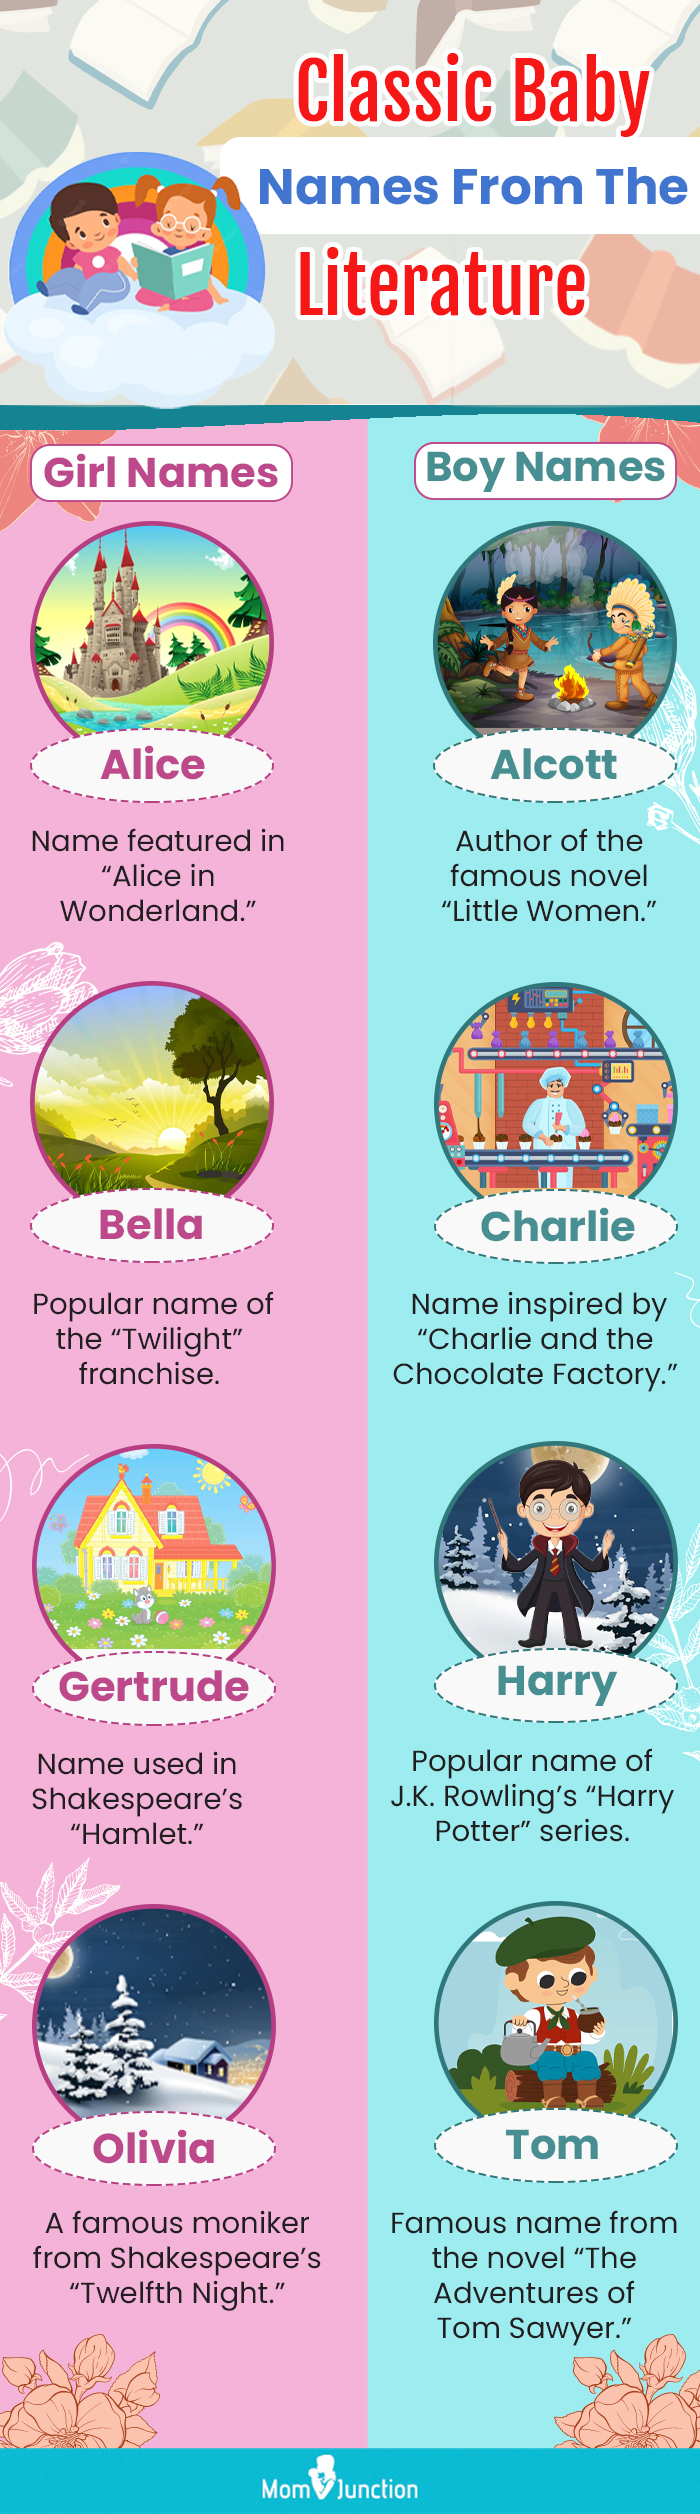 classic baby names from the literature (infographic)